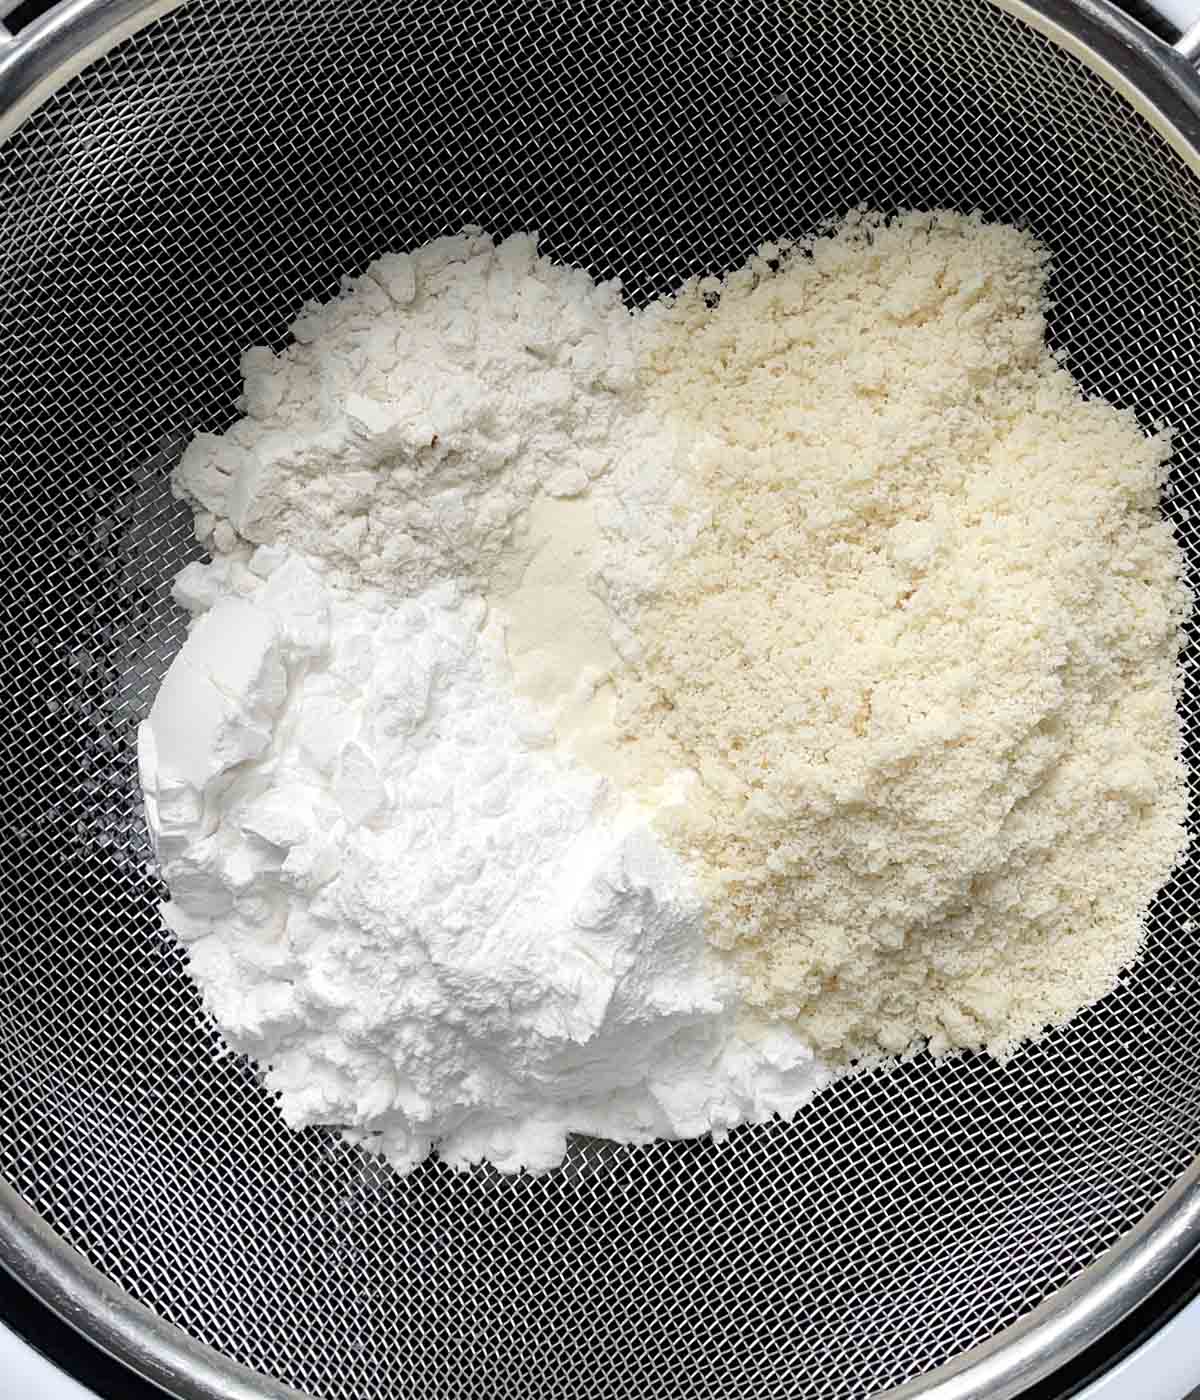 White and yellow dry flour ingredients in a mesh strainer.